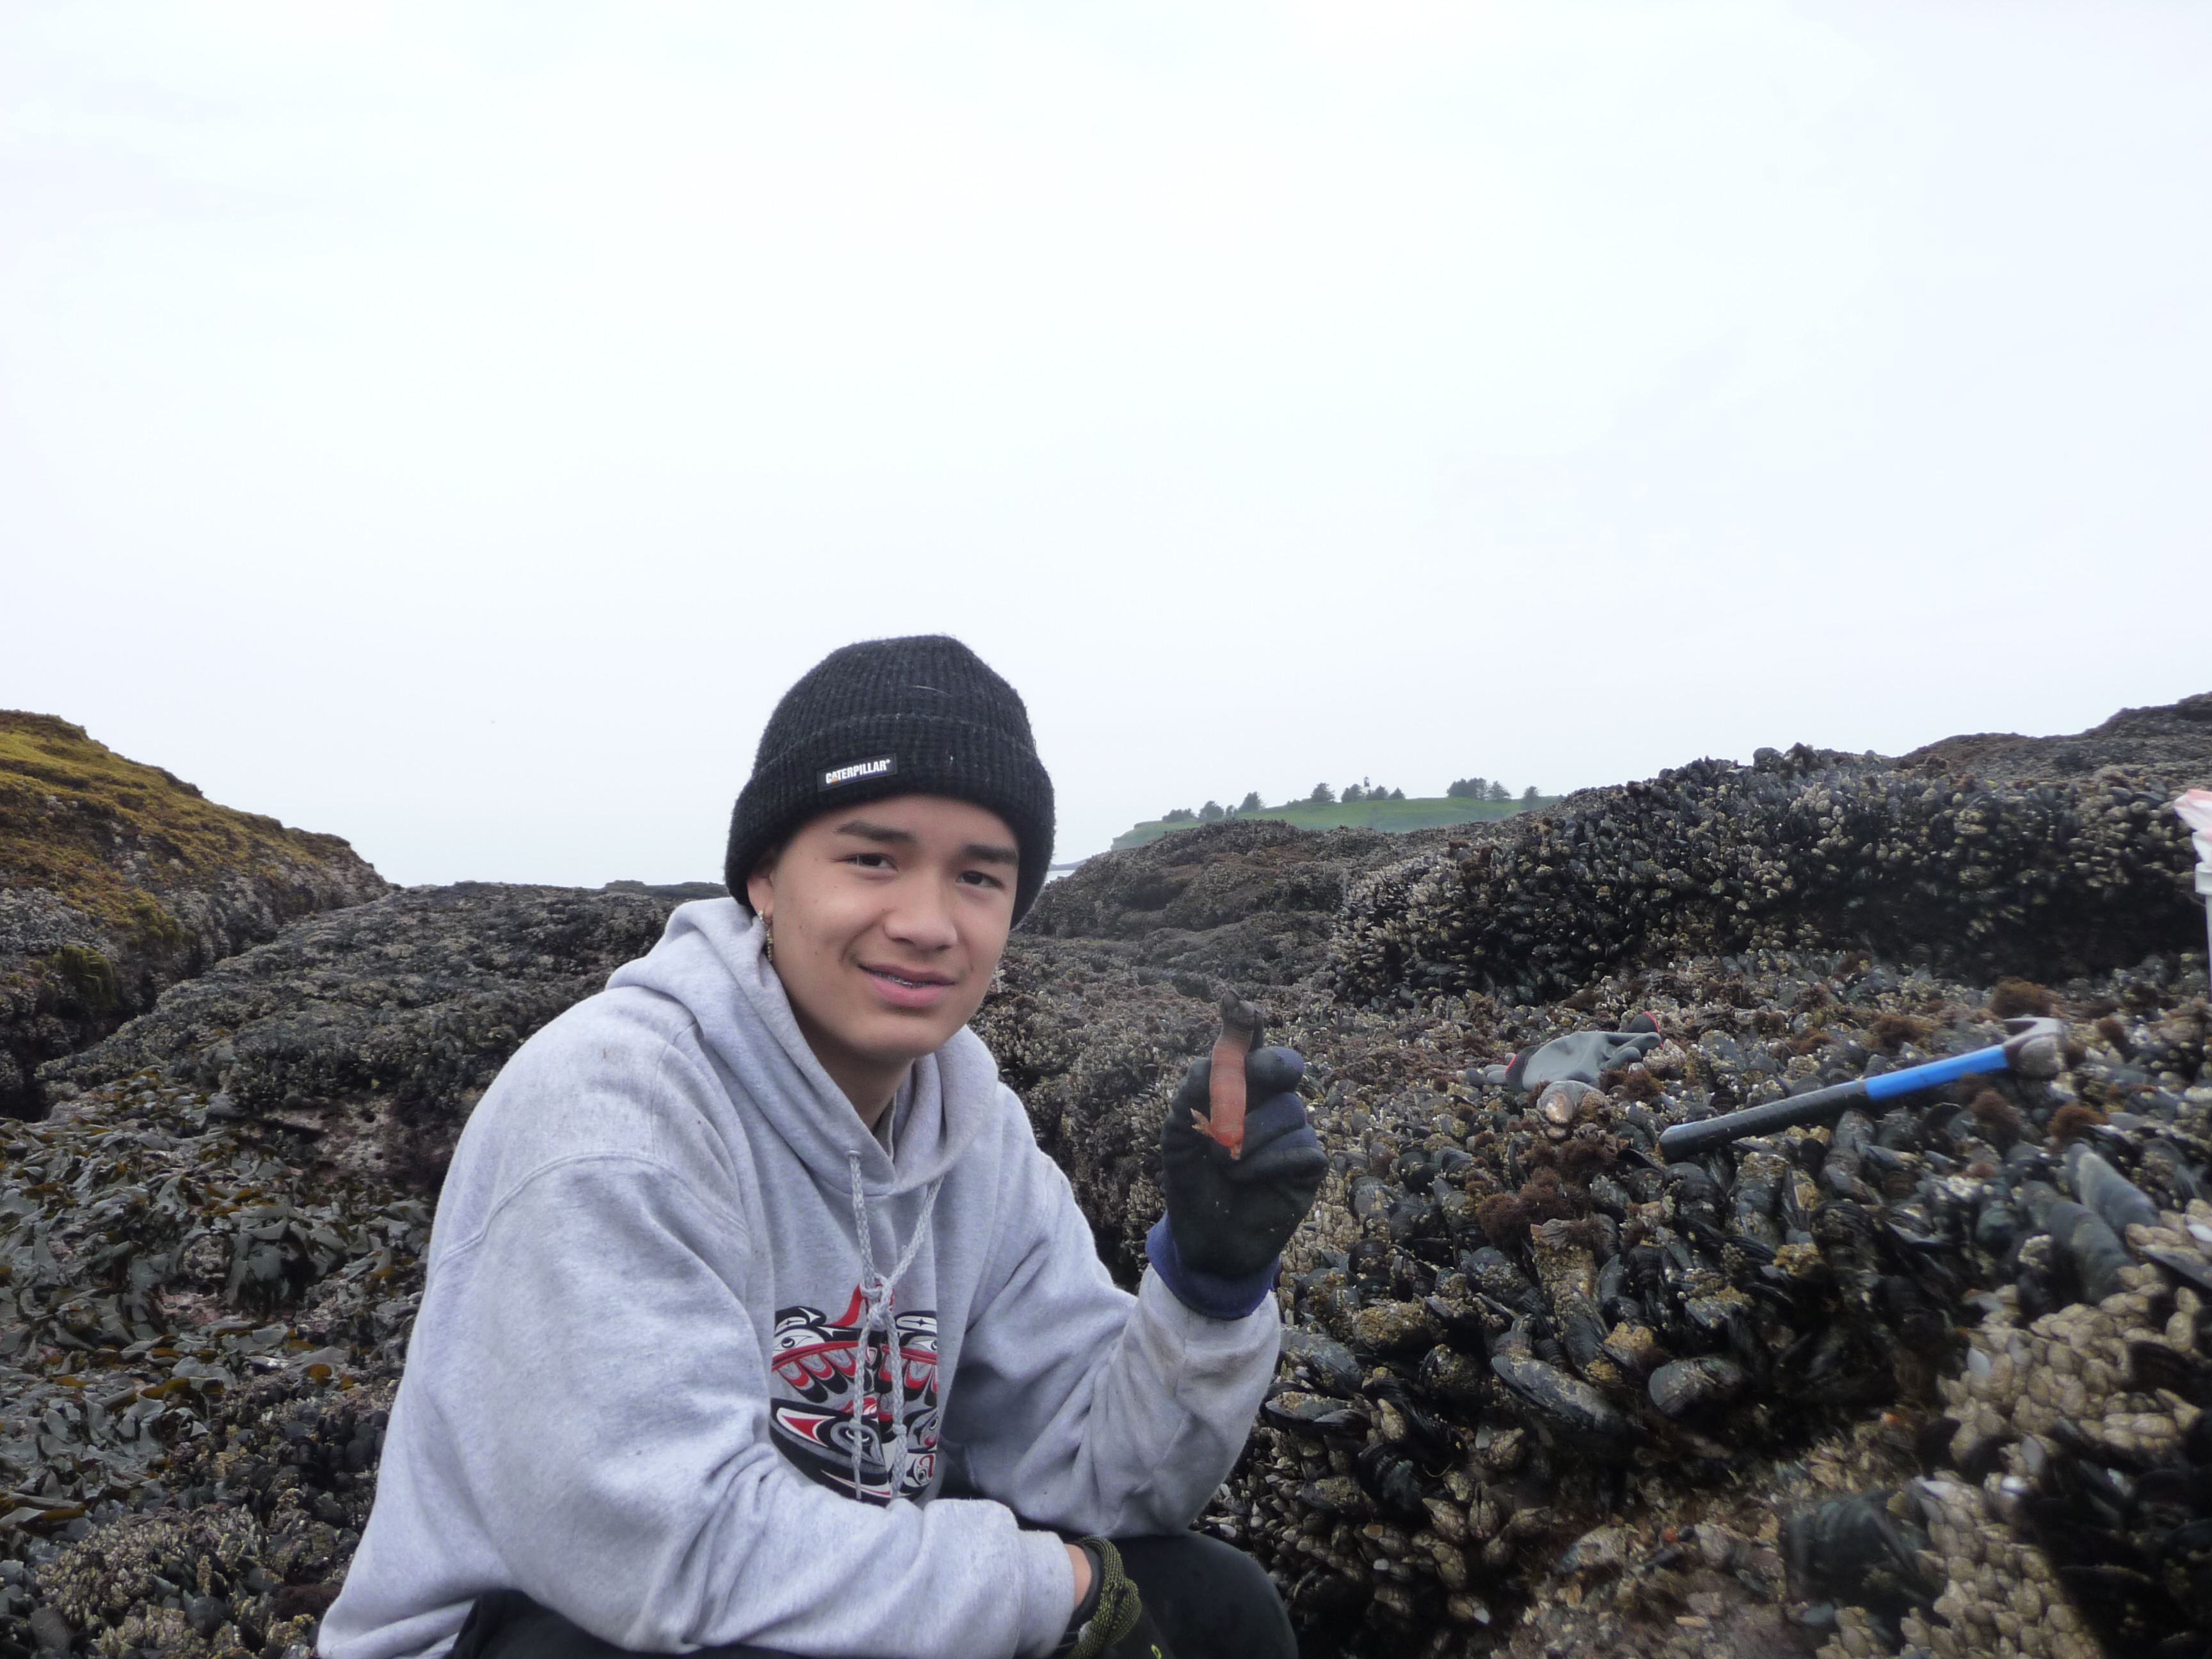 Janine Ledford's son holding up a gooseneck barnacle, while squatting on the rocky coastline, on a cloudy day. 